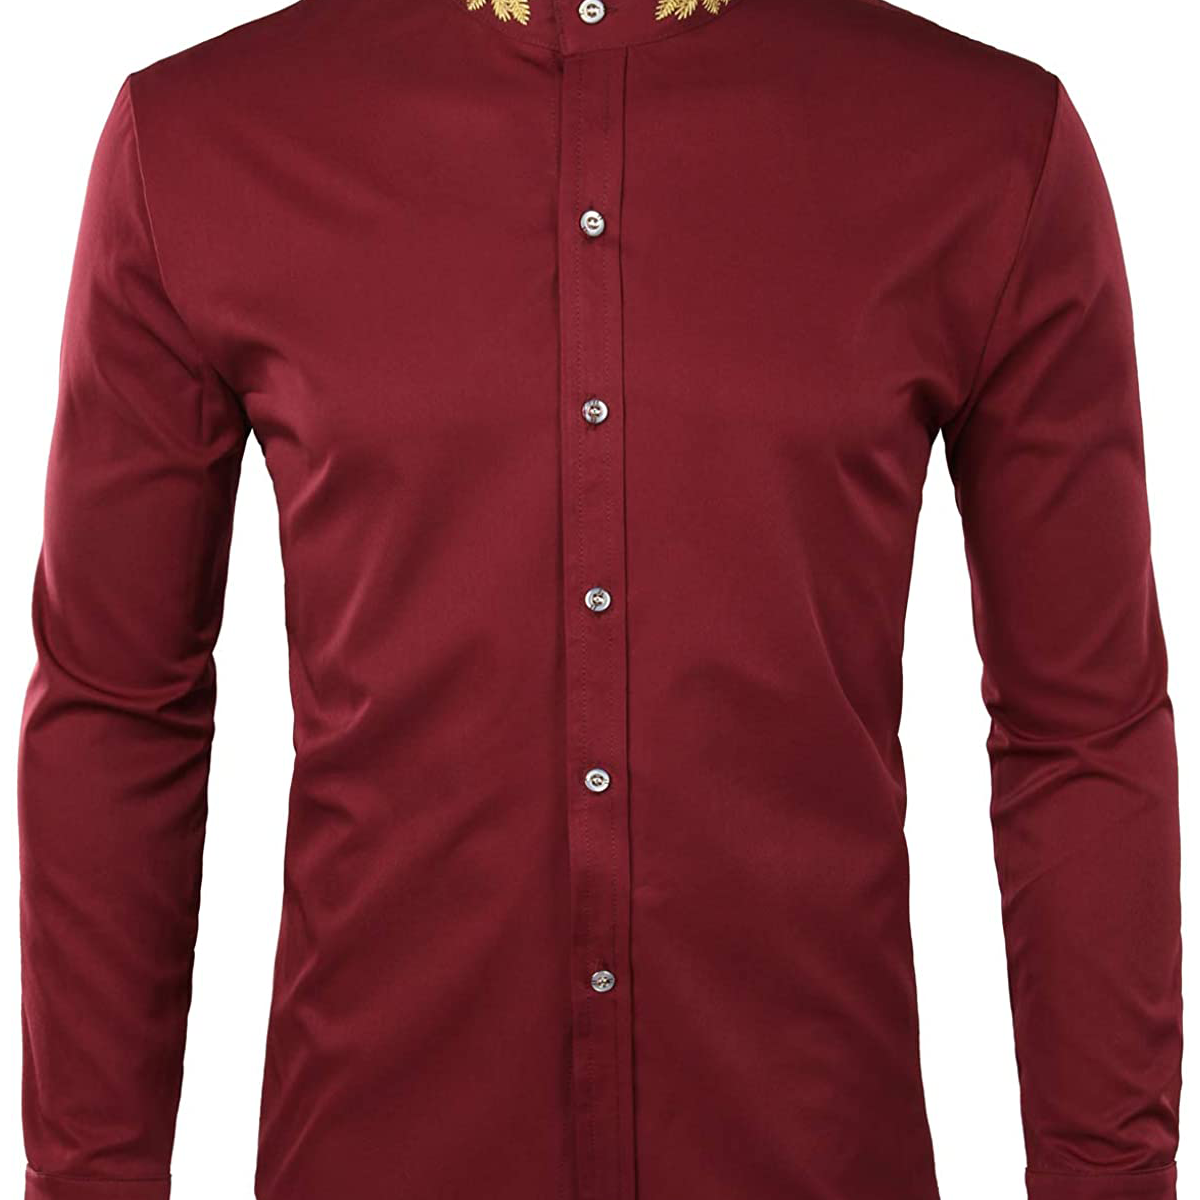 Men's Solid Color Collar Embroidered Long Sleeve Shirt